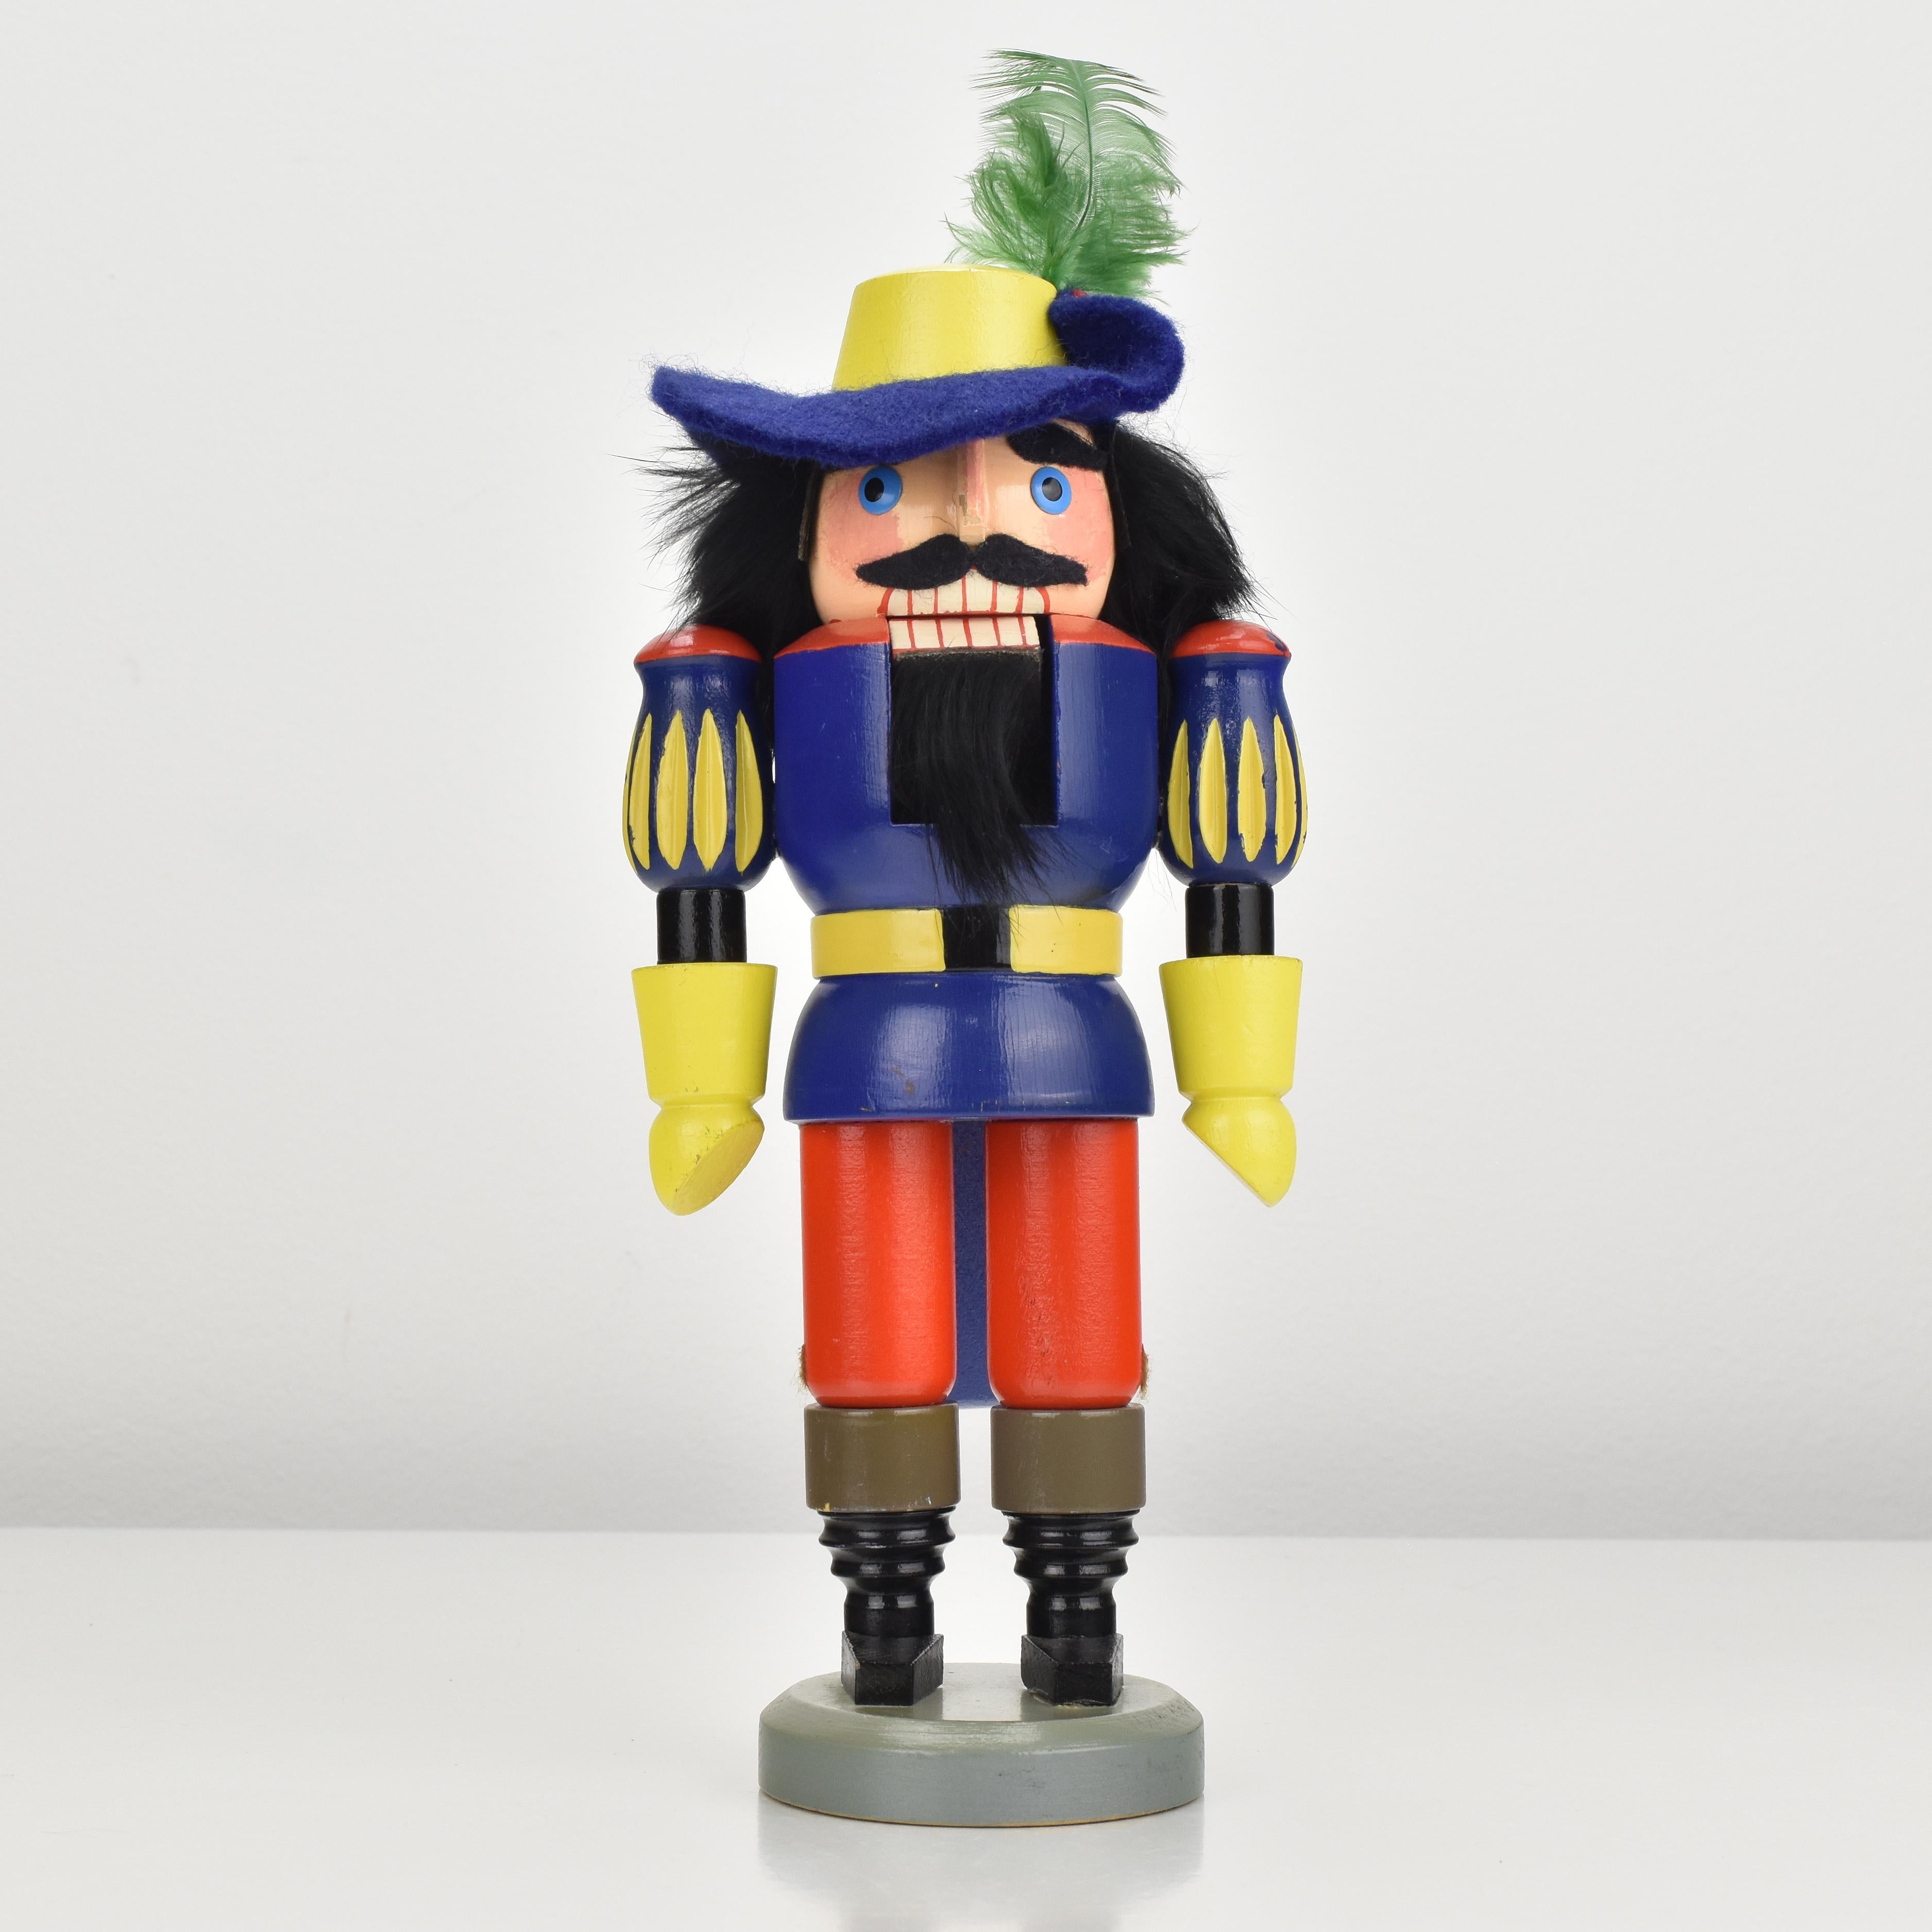 A vintage nutcracker from the Erzgebirge region, in shape of a robber or nobleman made of turned wood and painted in vibrant colors, dating back to the 1970s.
This nutcracker features a blue felt hat with a green feather and is decorated with real